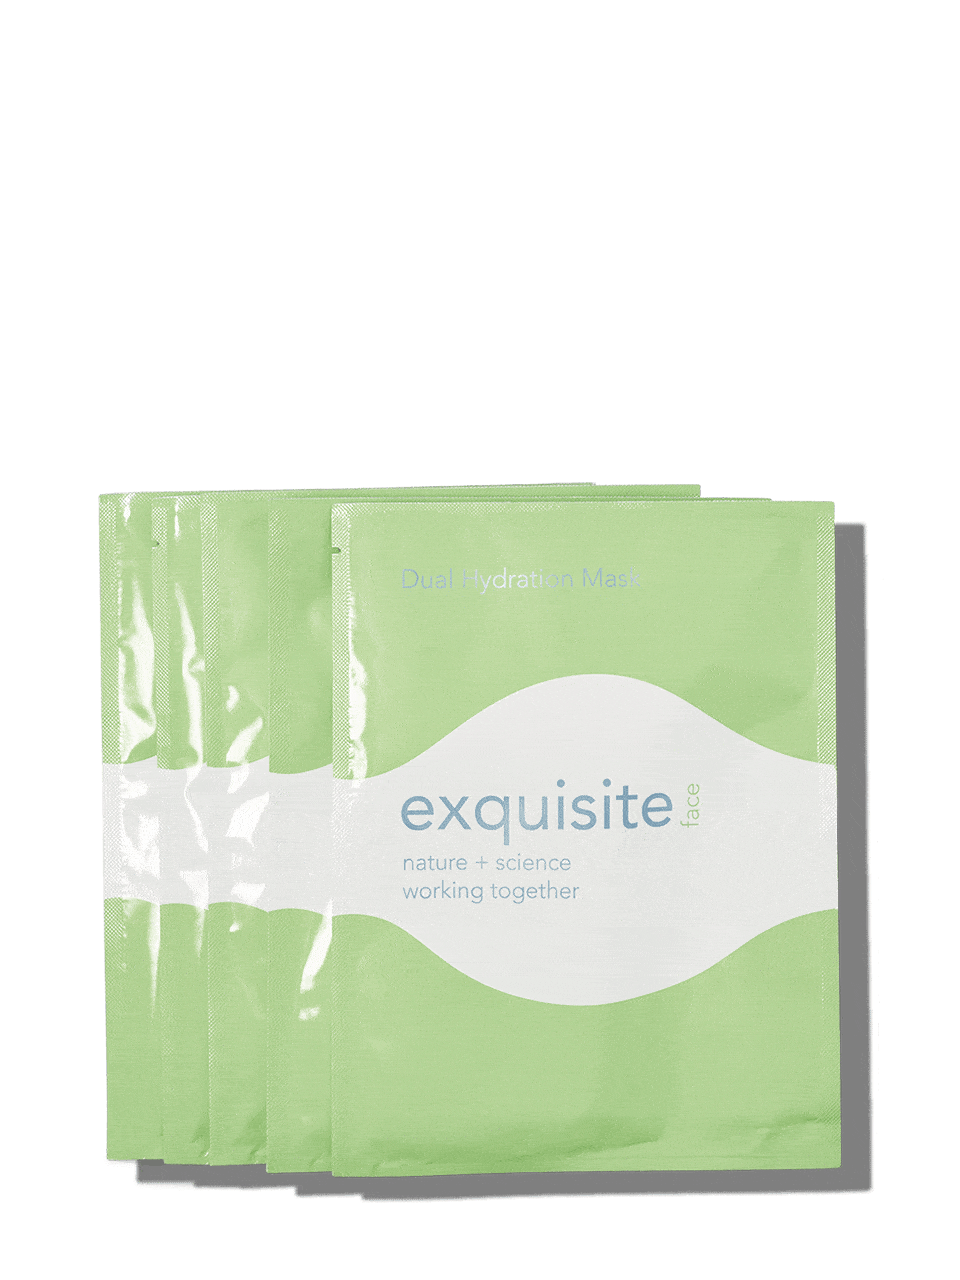 Dual Hydration Sheet Masks Facial Care Exquisite Face + Body 